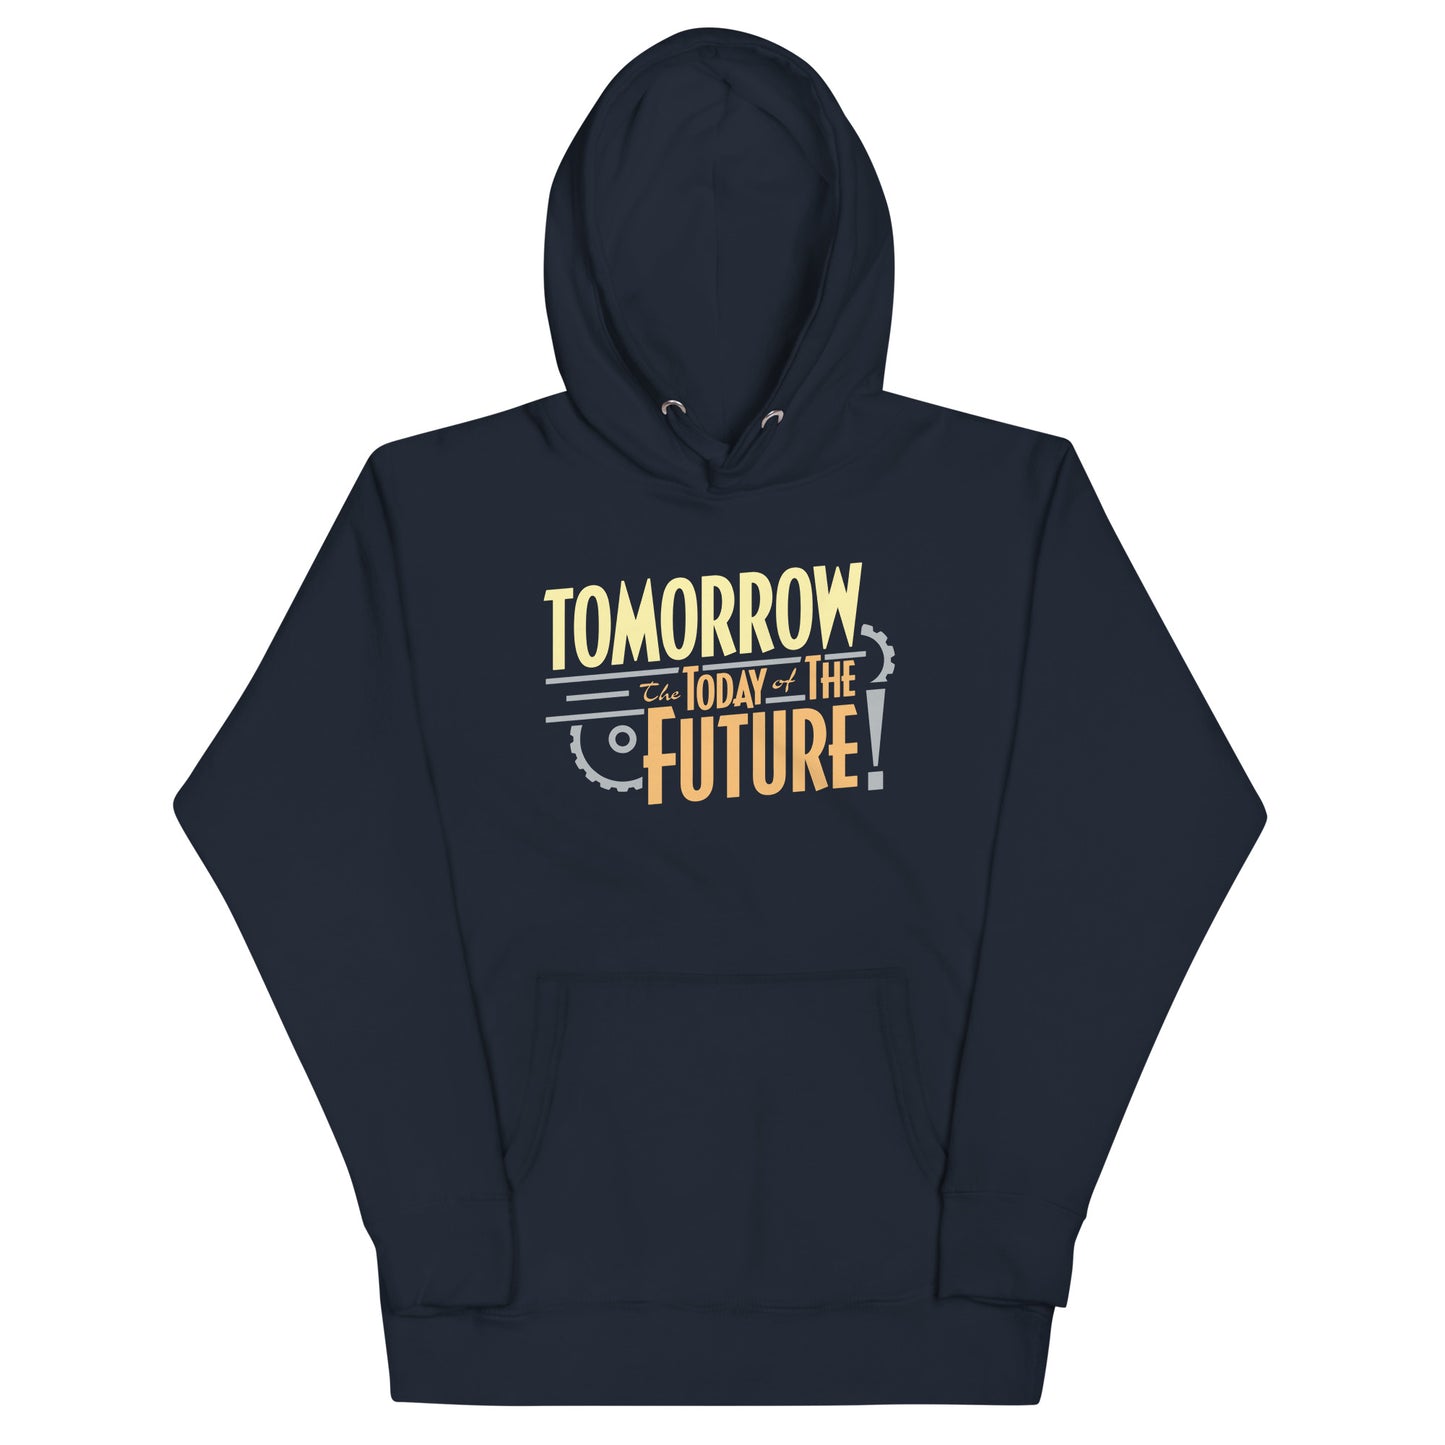 Tomorrow, The Today Of The Future Unisex Hoodie